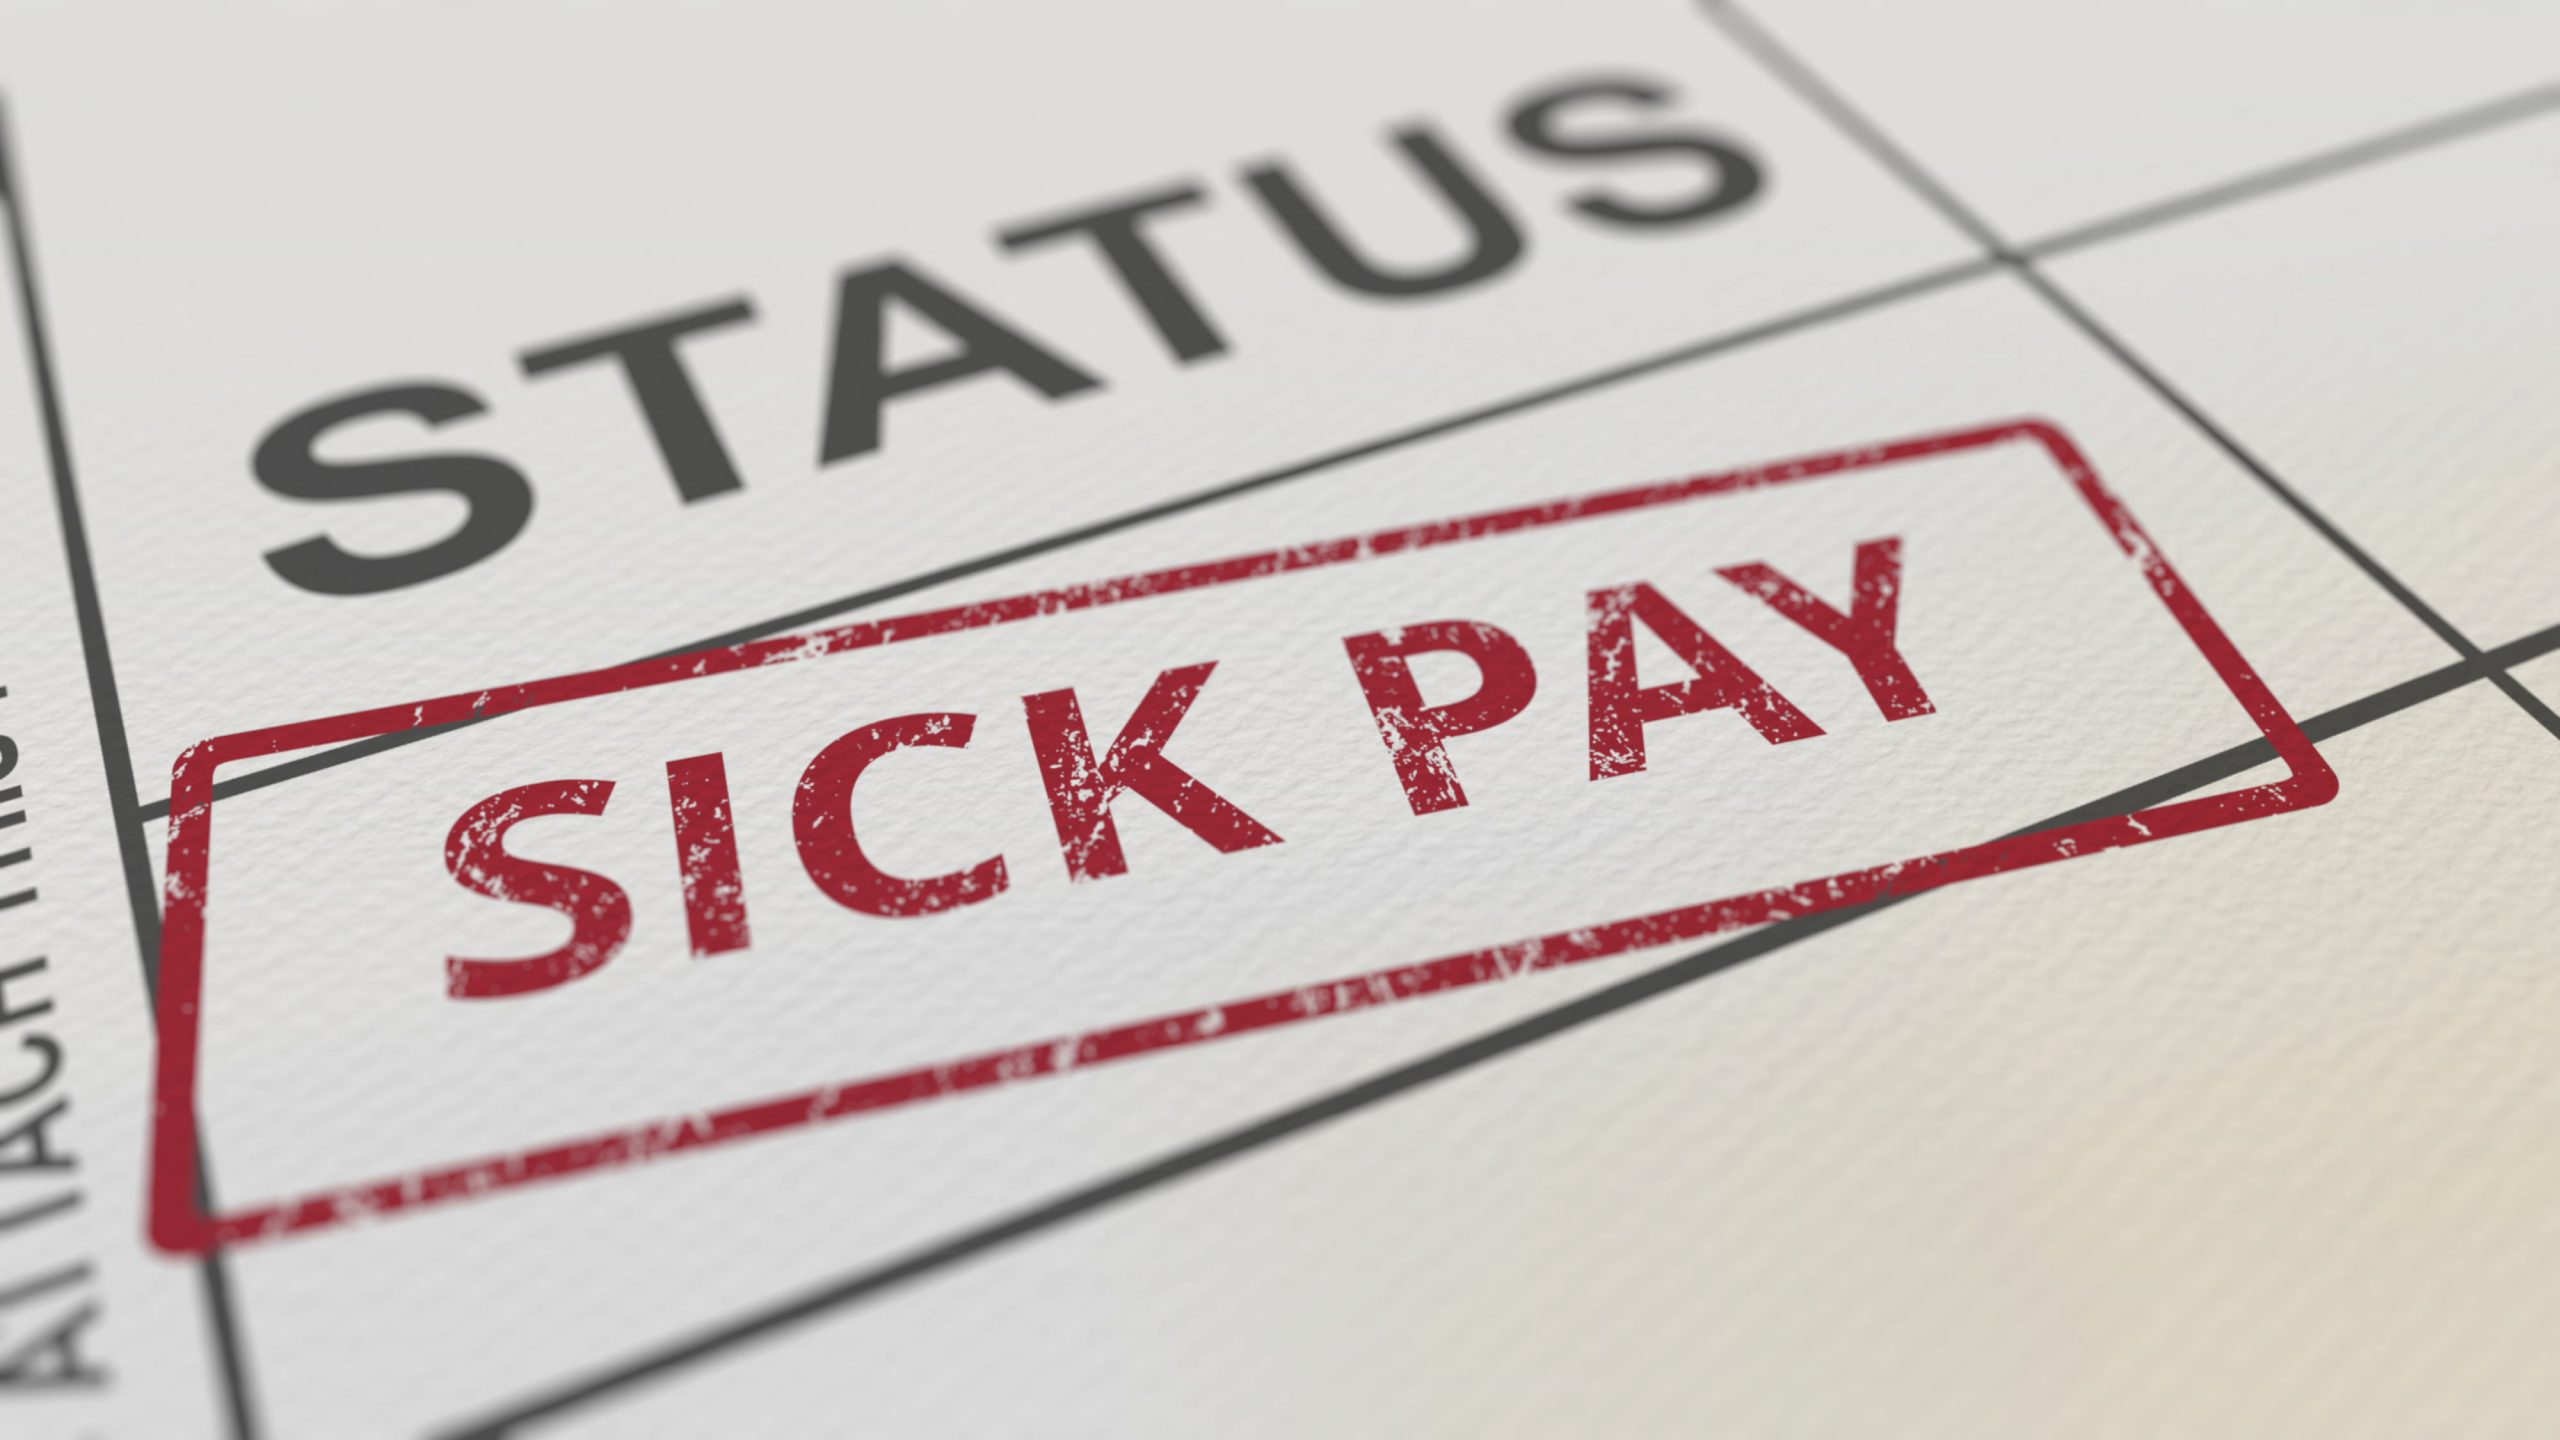 claims-portal-reopens-for-statutory-sick-pay-rebate-scheme-nhllp